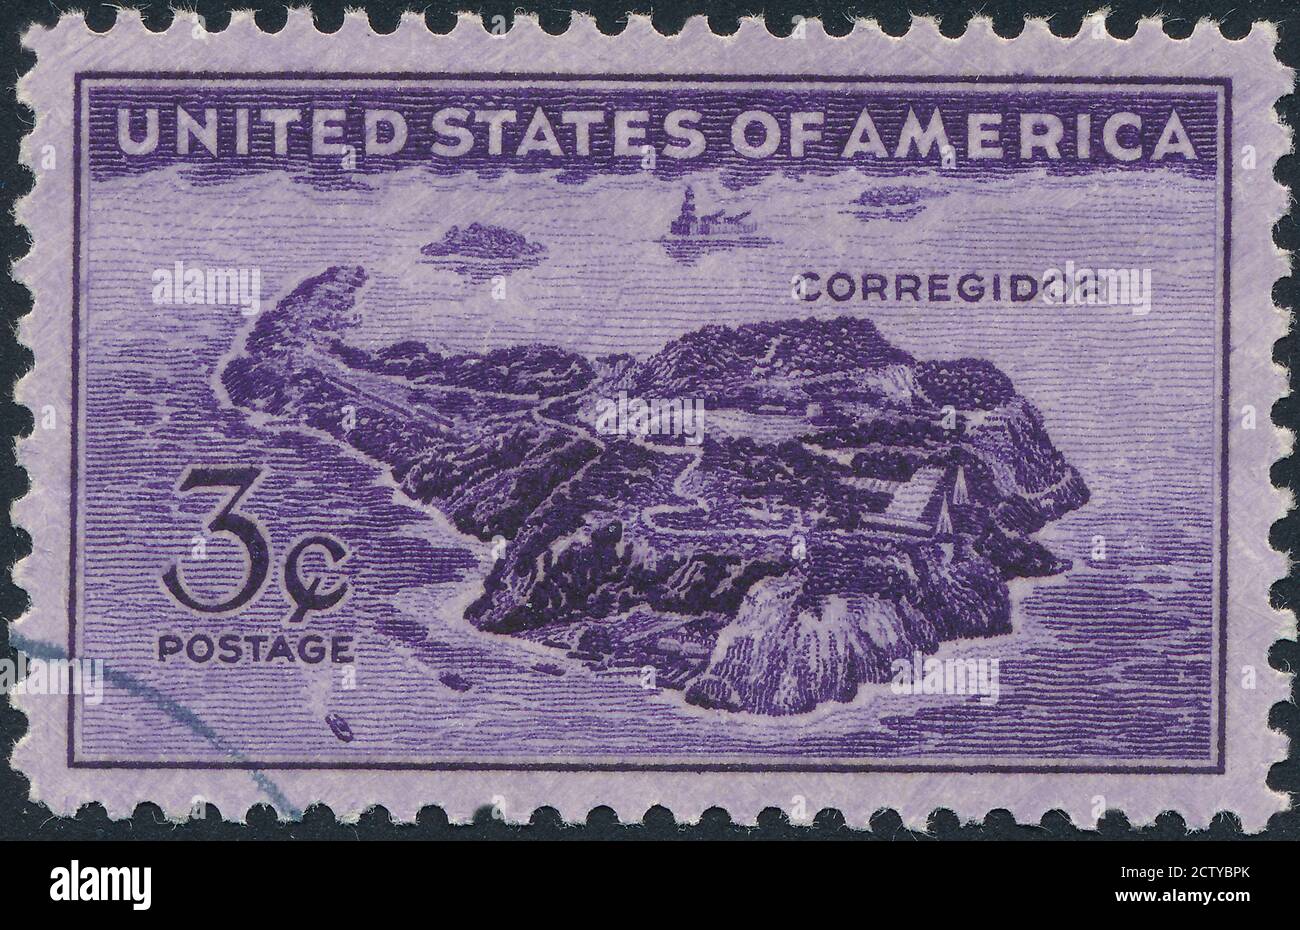 Postage stamp printed in USA shows View of Corregidor, Philippines Issue, Final resistance of the US and Philippine defenders on Corregidor, 1944 stoc Stock Photo